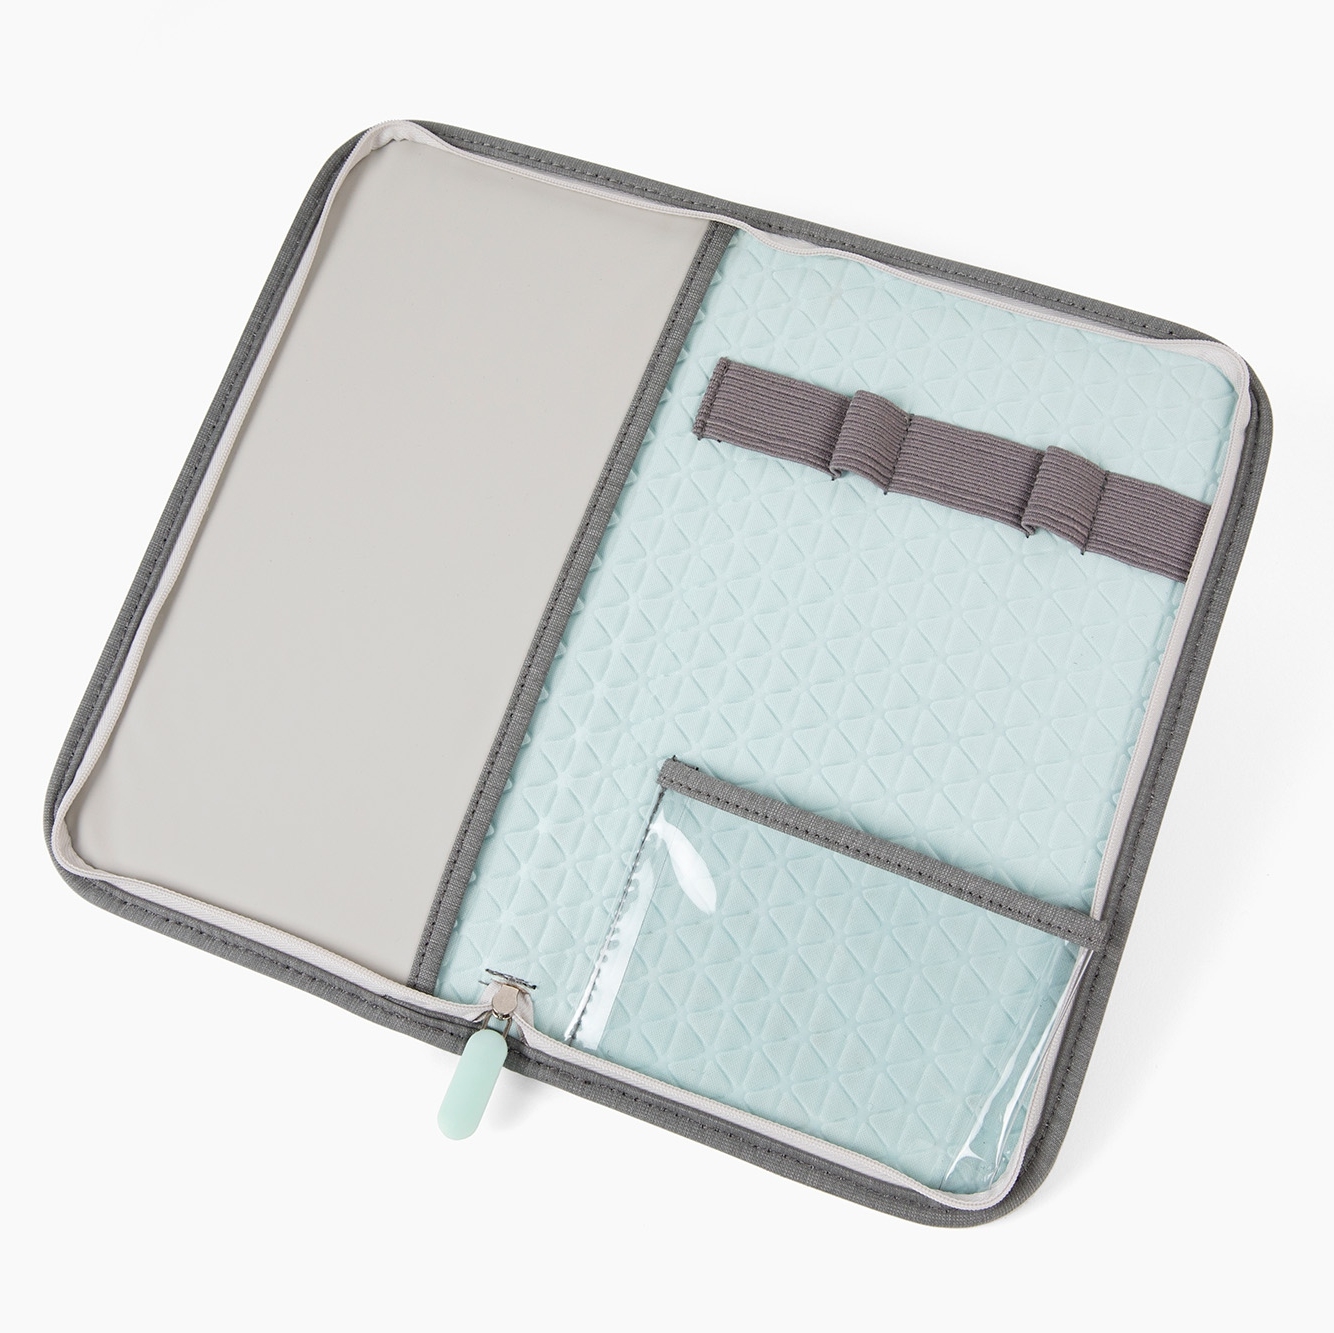 Get organized with our IVF Organizer + Shot Station. ⁠ With over a dozen  distinct pockets to organize your meds, the IVF Organizer holds the MOST  meds, By MyVitro